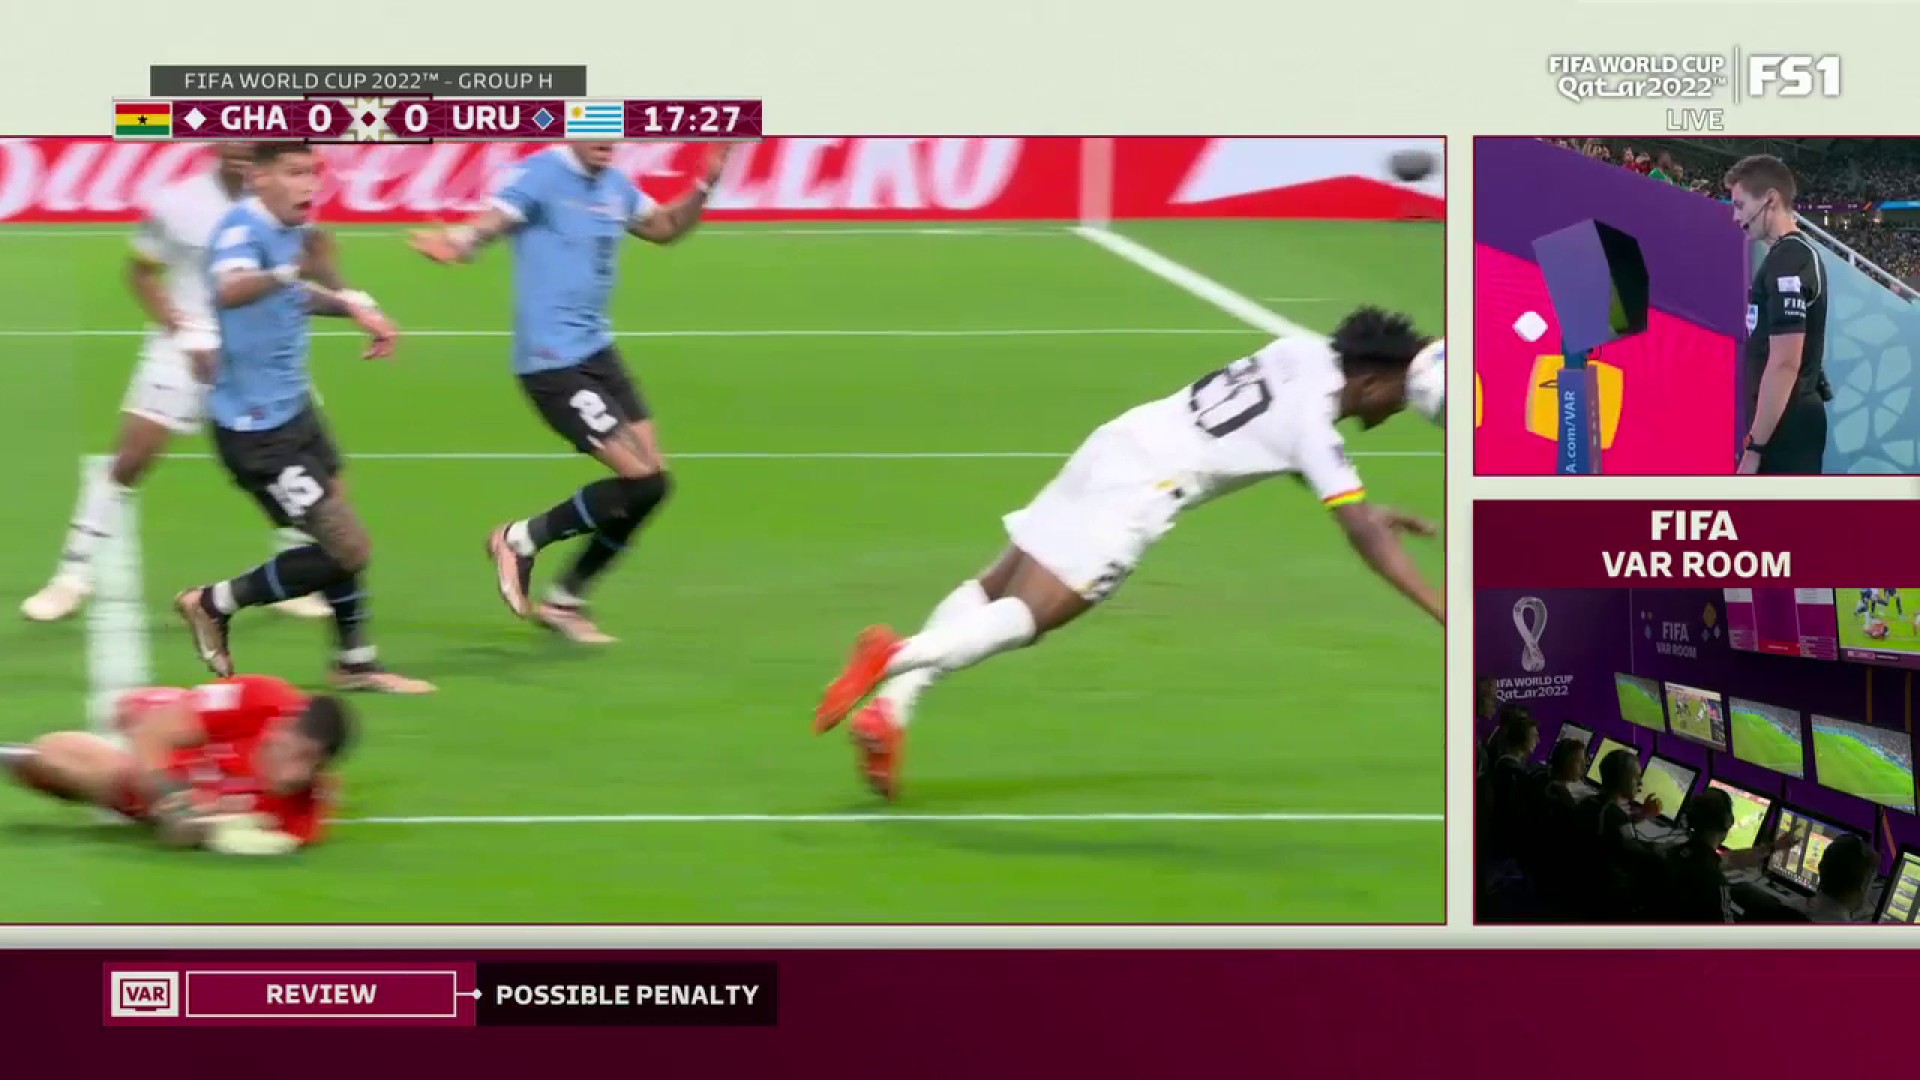 PENALTY

Ghana is awarded a penalty after this foul”